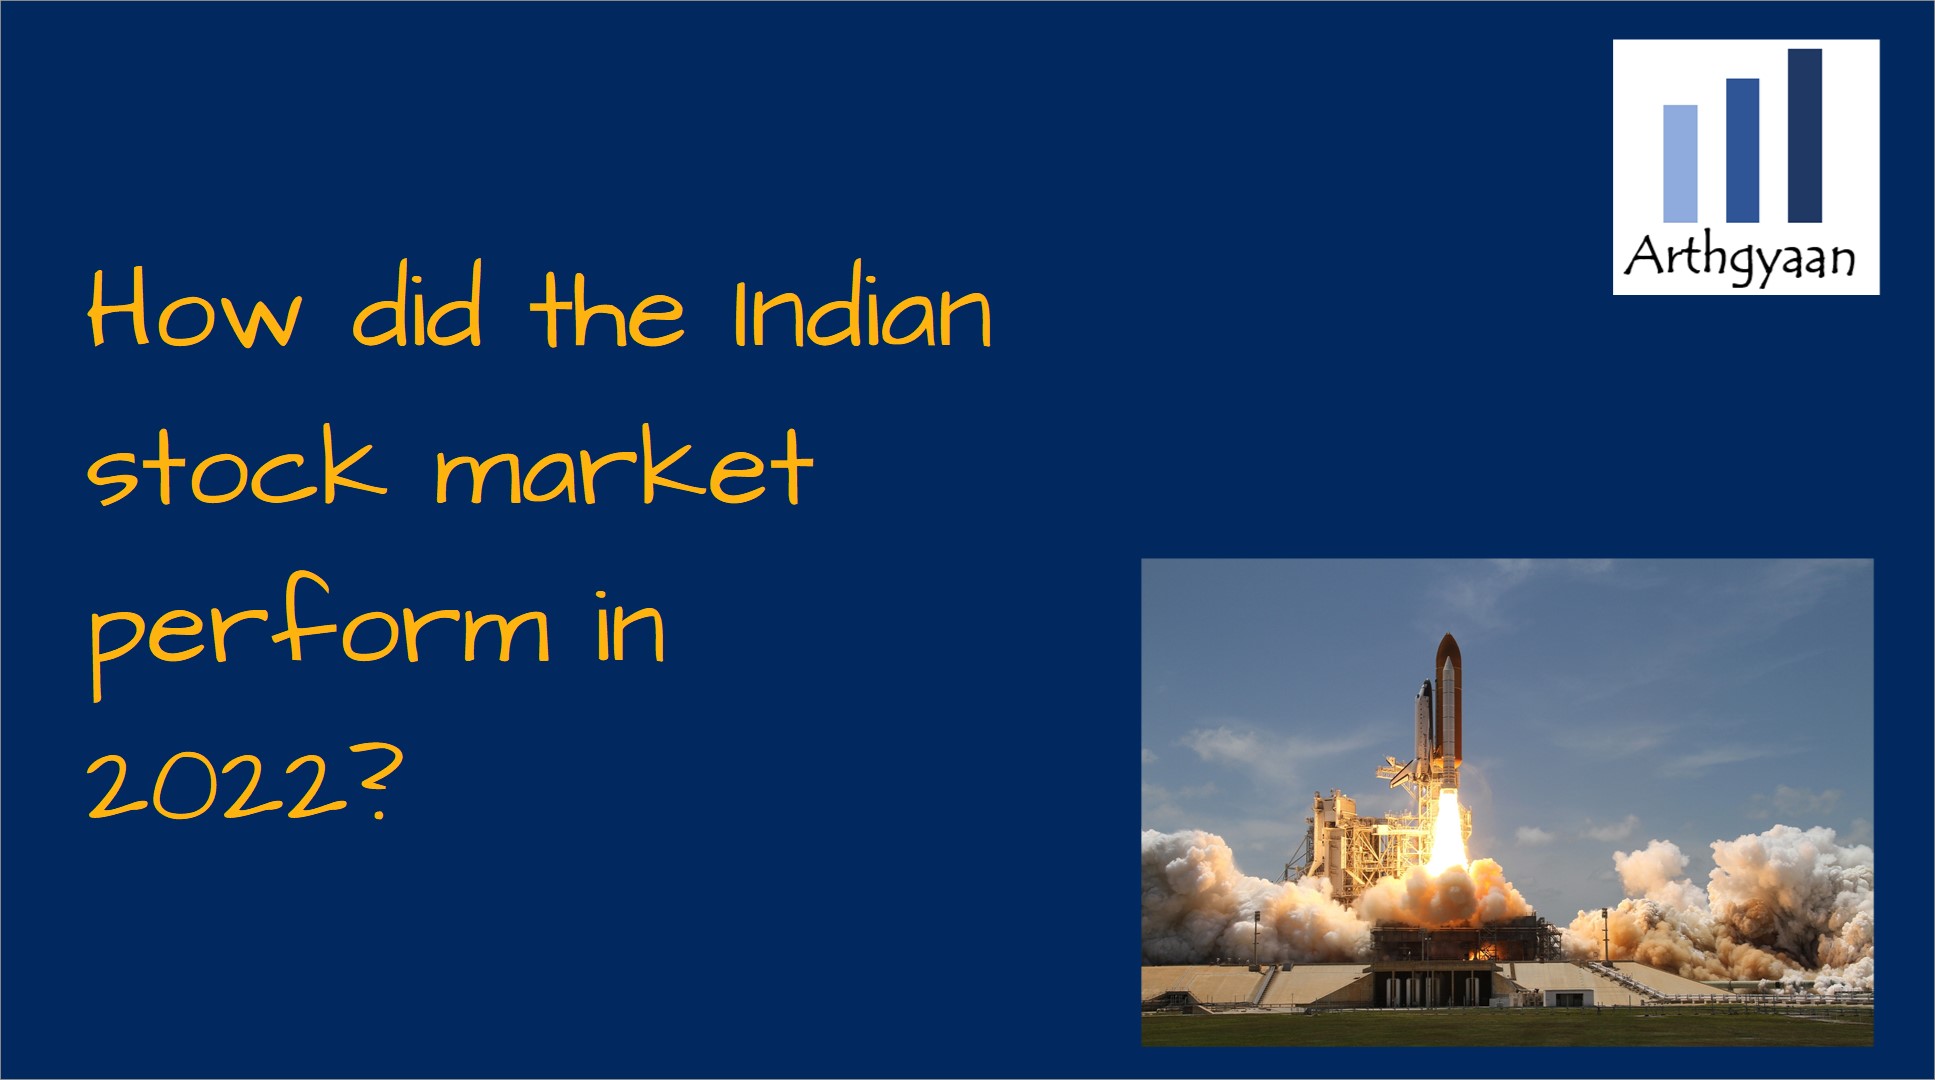 How did the Indian stock market perform in 2022?